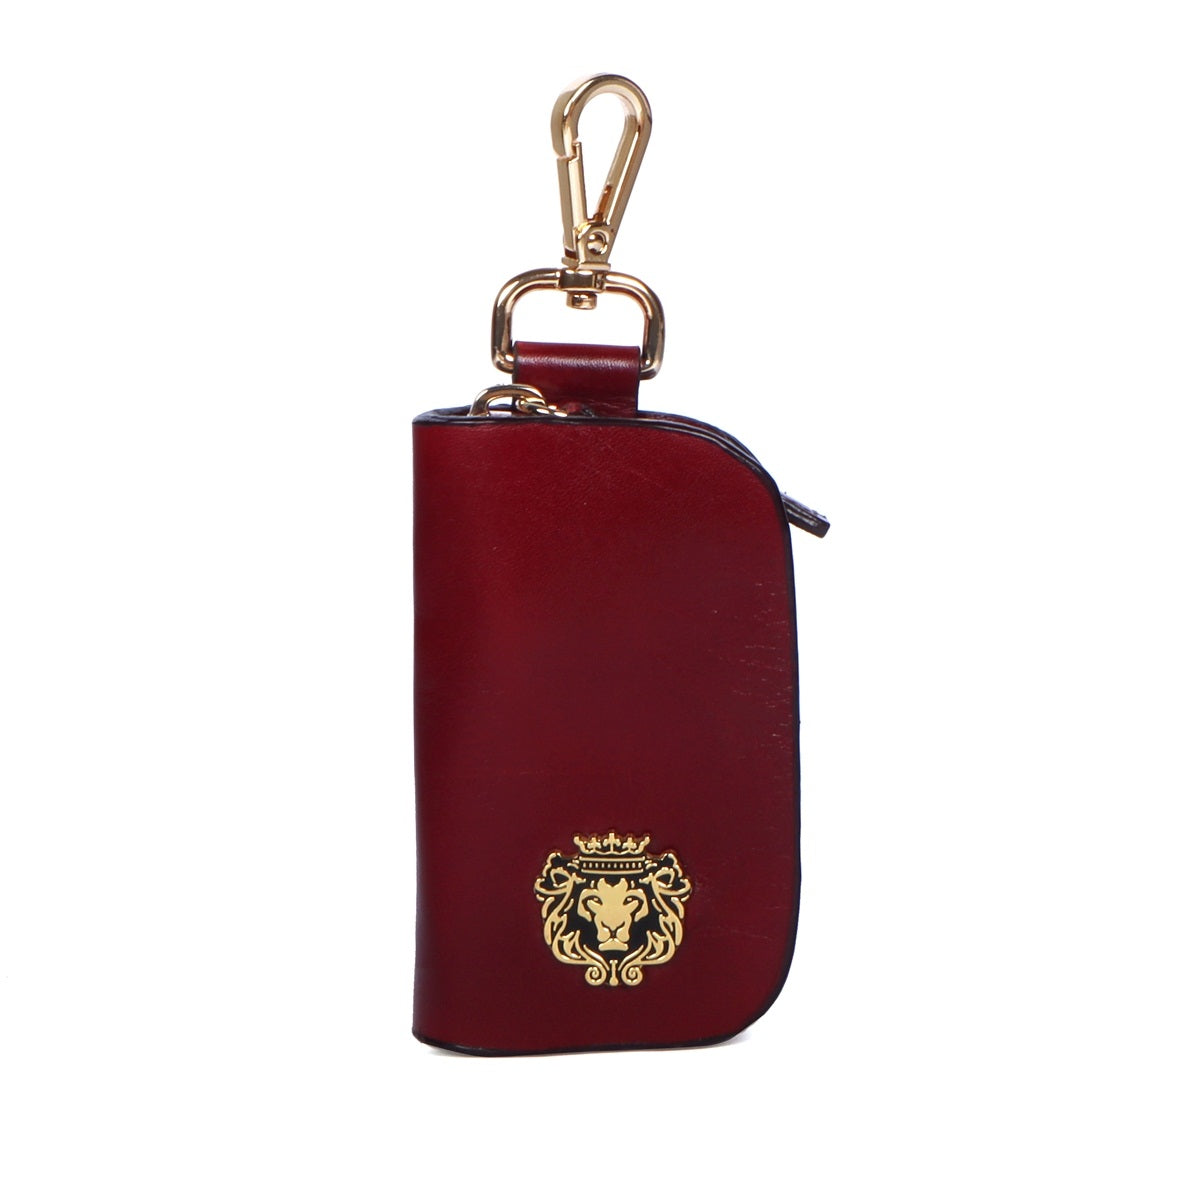 Wine Red Unisex Genuine Leather Key Case Wallet Pouch Bag Keychain